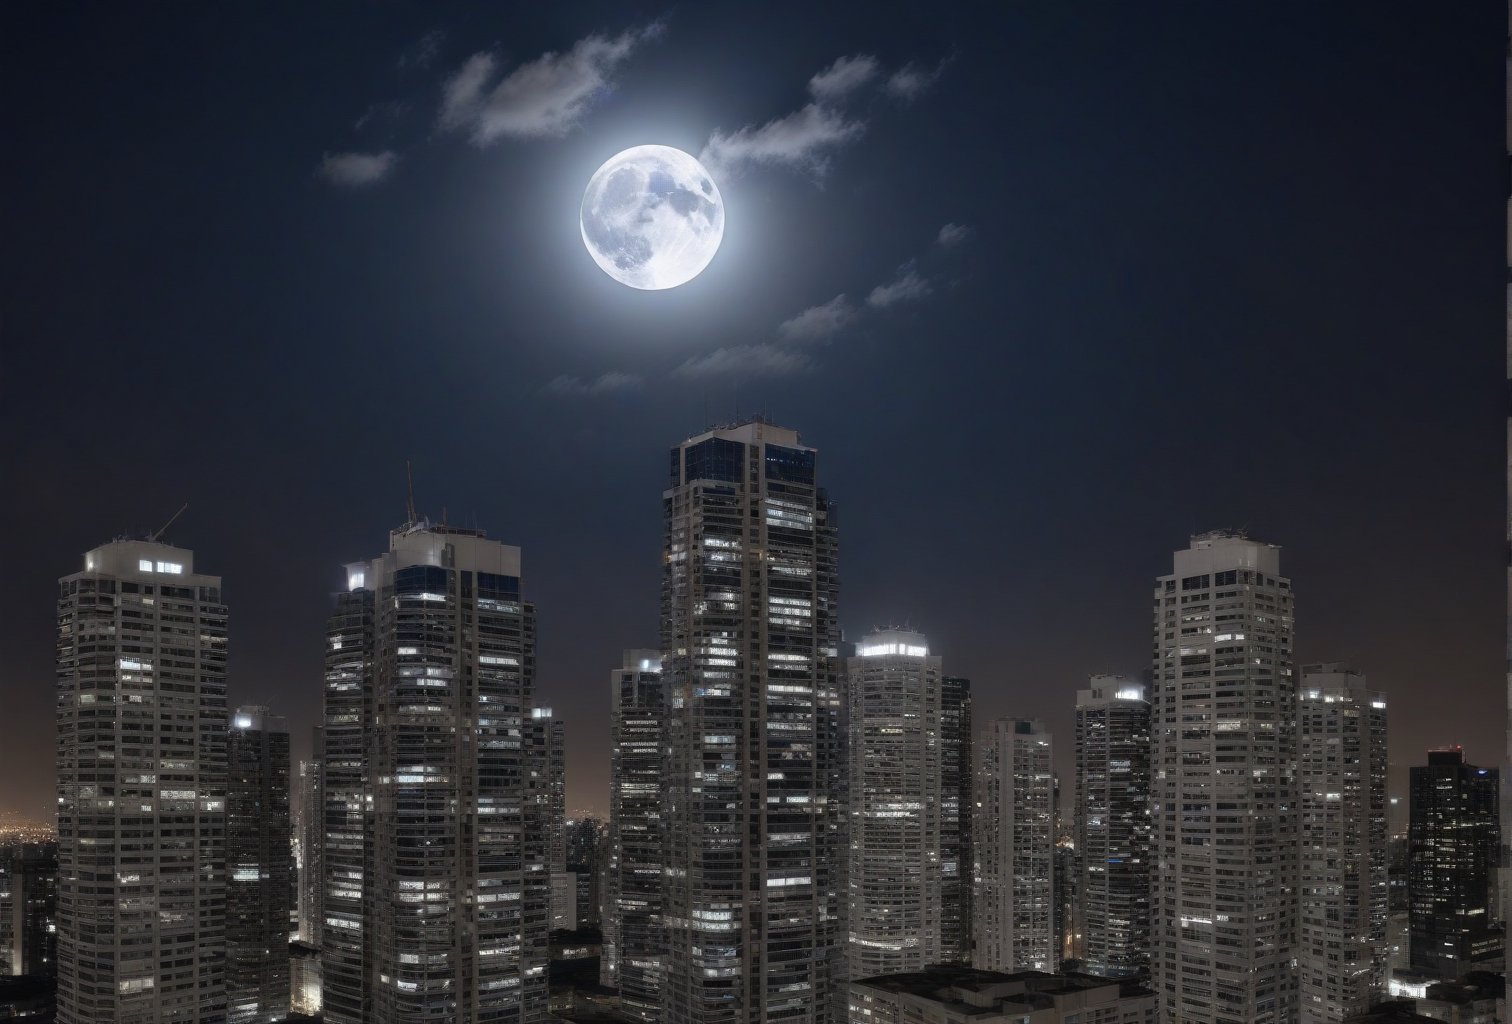 night, dark blue sky with blurry white clouds, full moon, black rectangular skyscrapers with small windows in which white light is visible, metal superstructures are visible at the tops of skyscrapers, brown cubes and a few gray cubes are visible at the base of skyscrapers, the earth is brown mud or clay